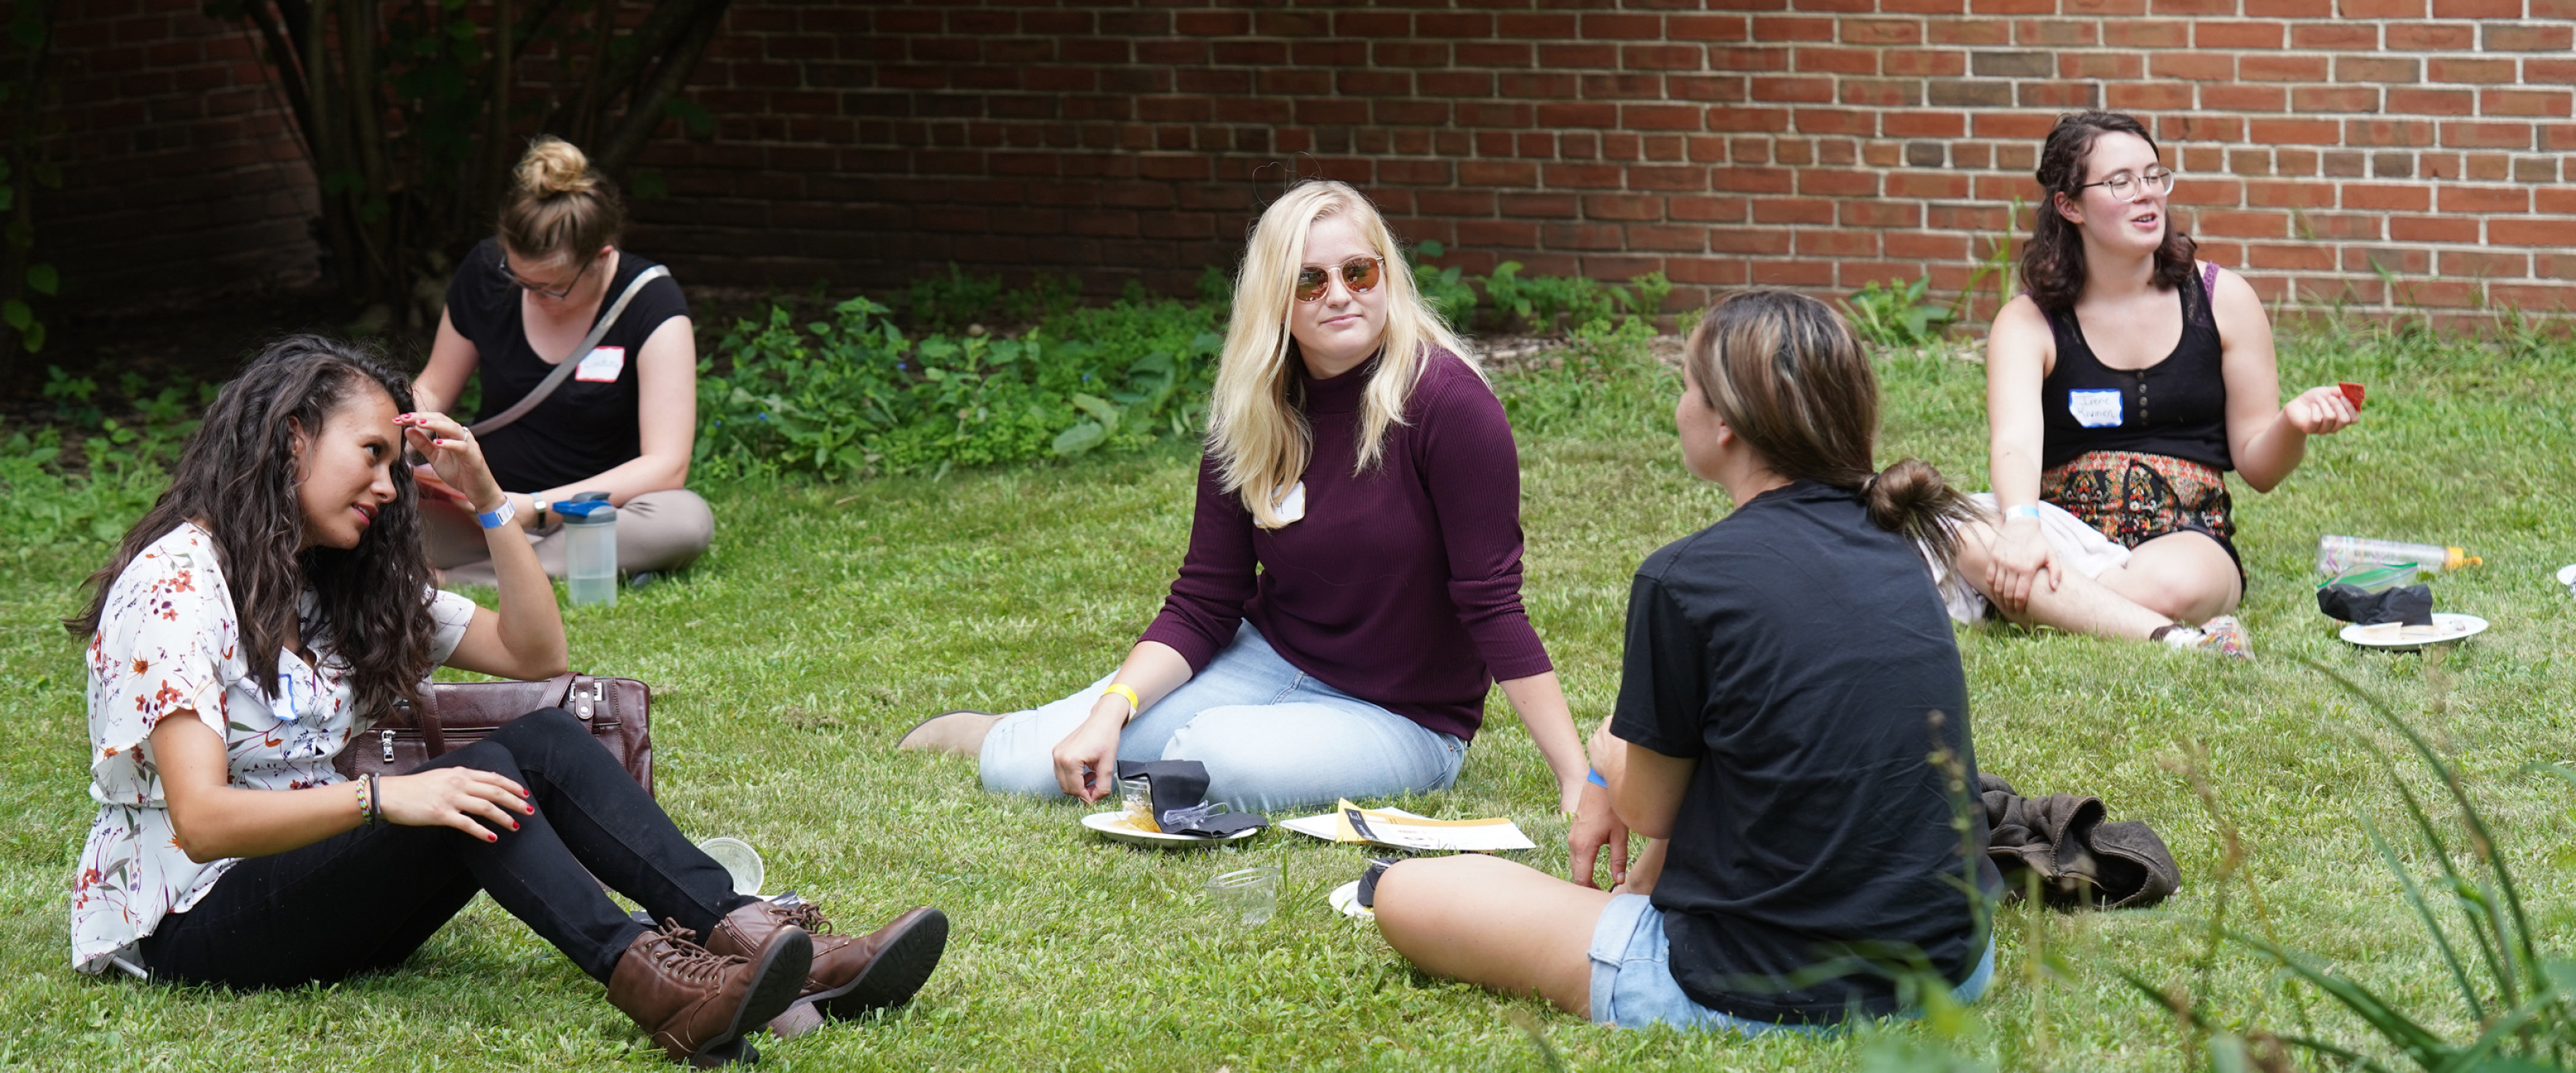 Students relaxing outside